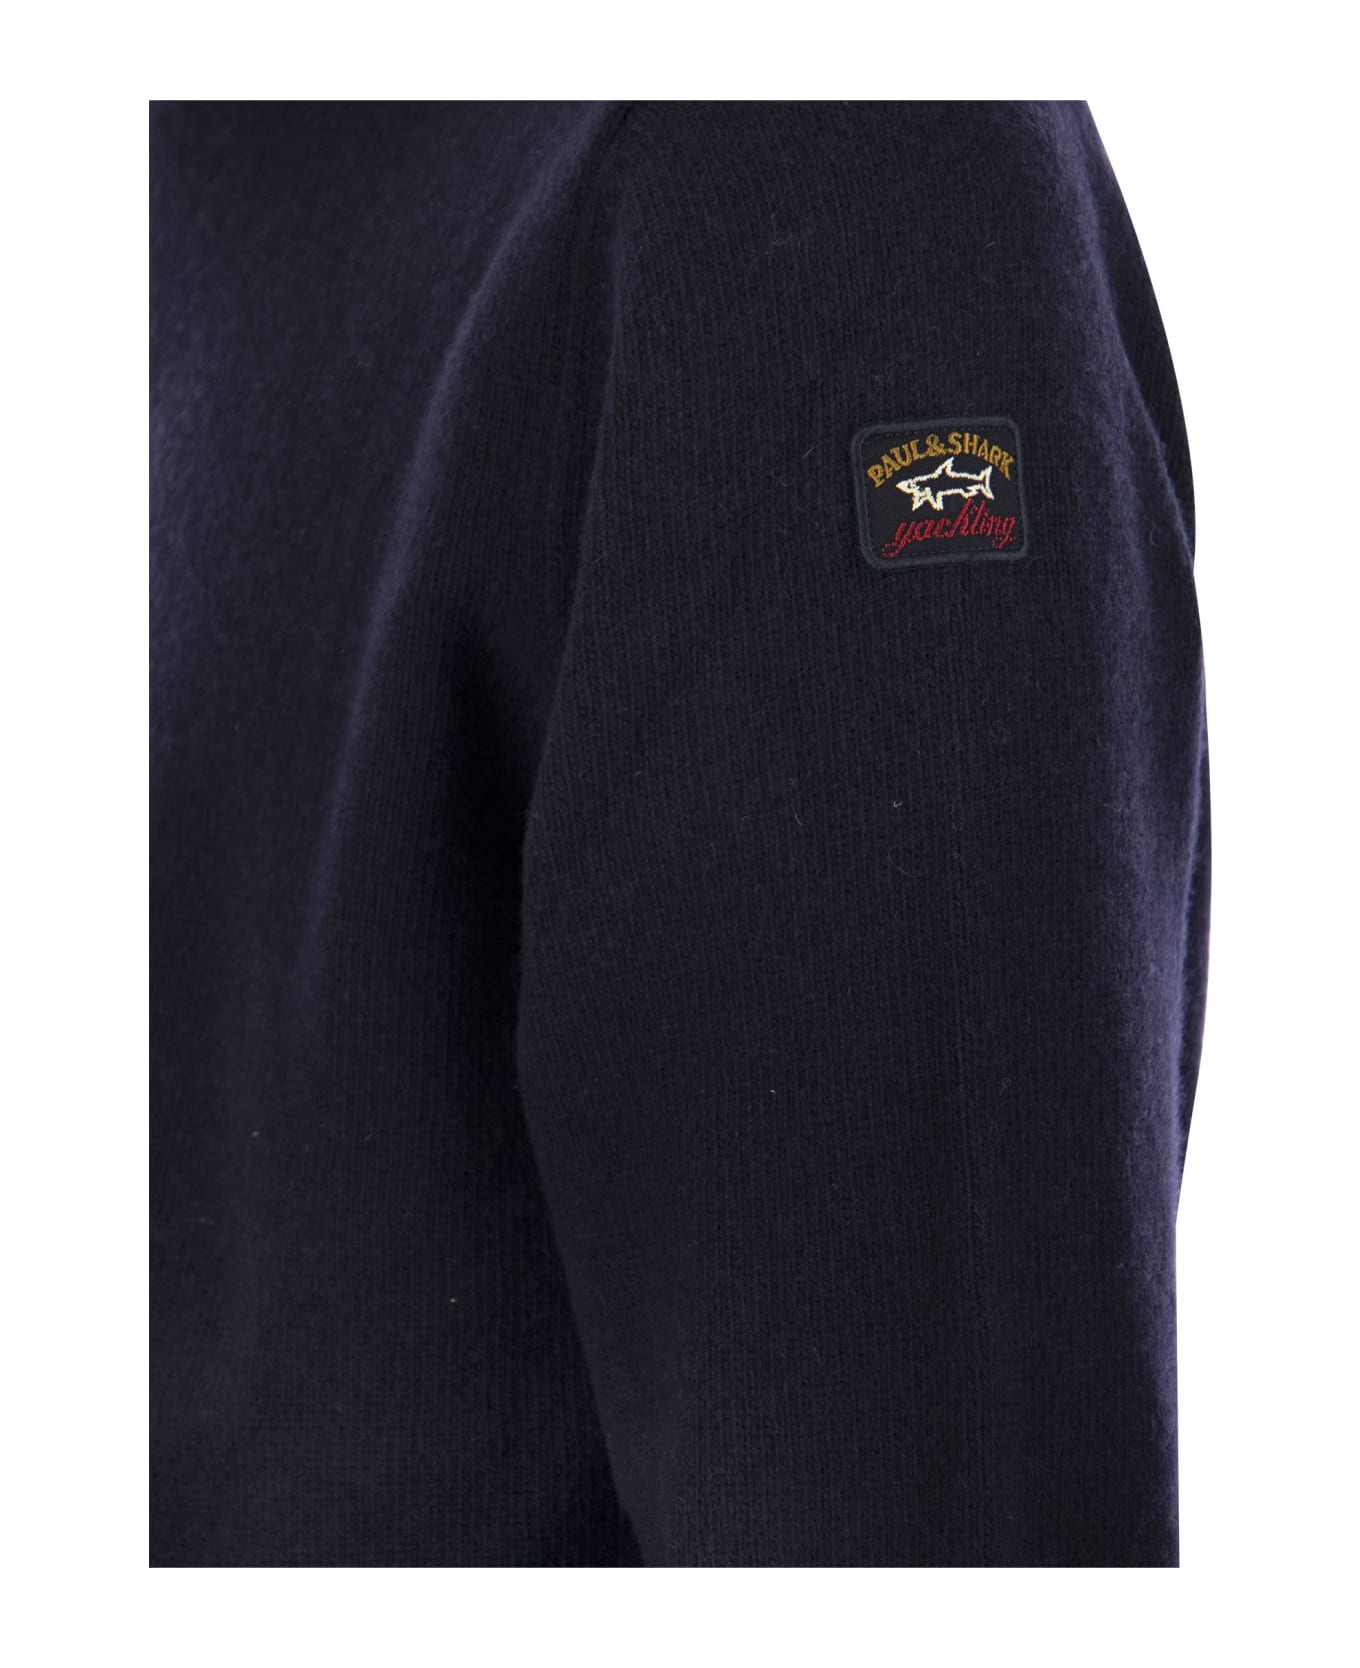 Paul&Shark Wool Crew Neck With Arm Patch - Blue